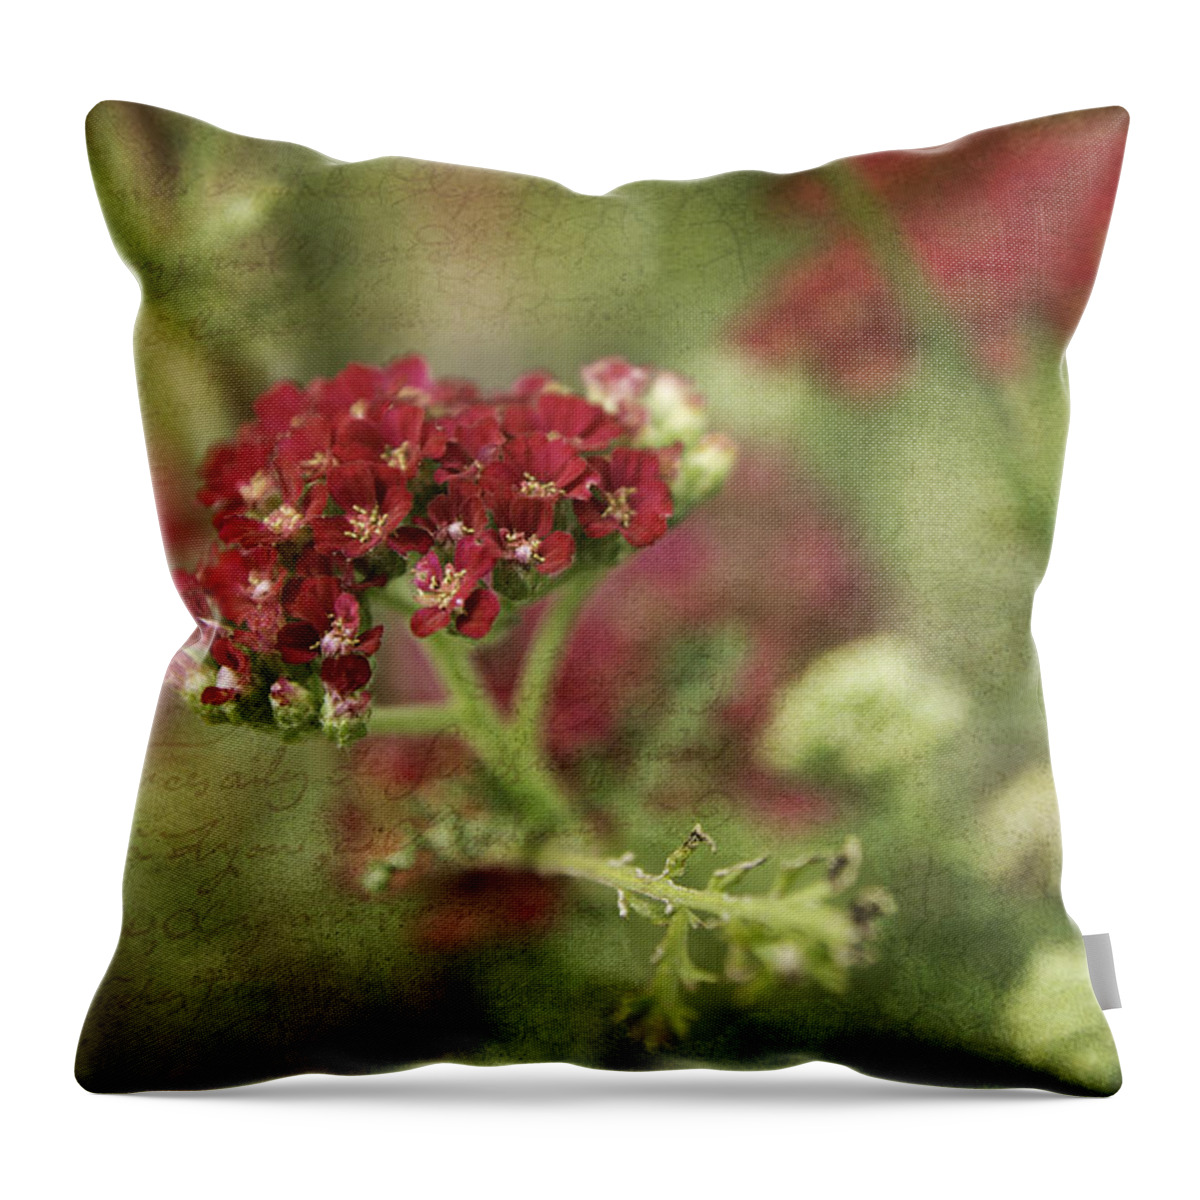 Texture Throw Pillow featuring the photograph Floral Prose by Bill Pevlor